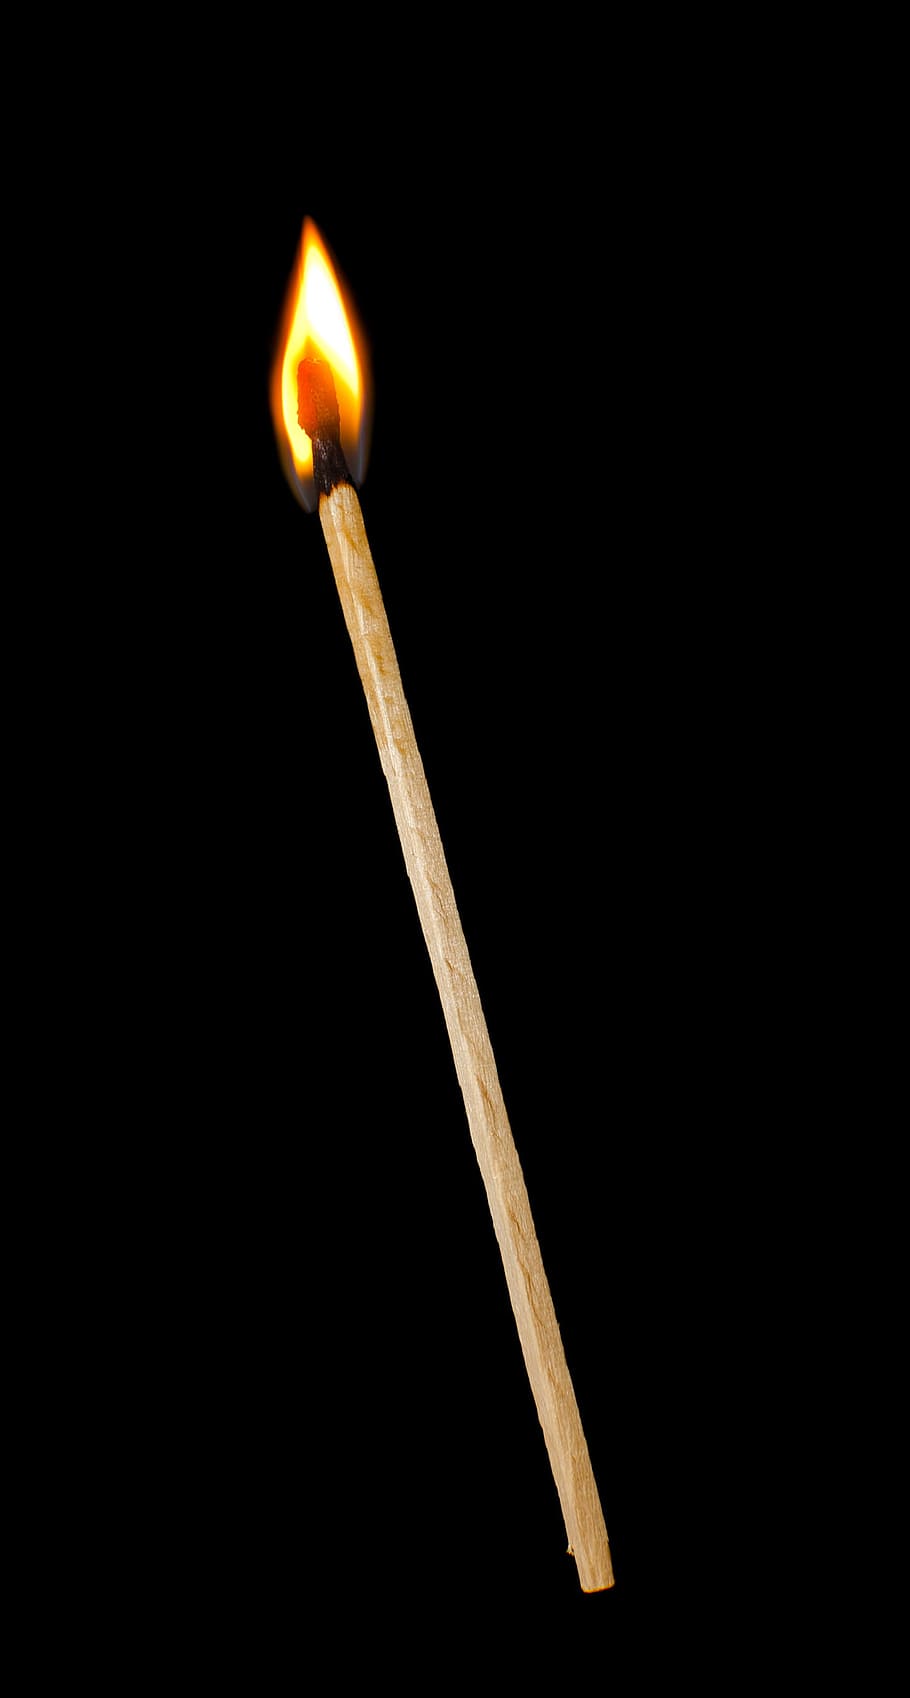 black, isolated, match, fire, stick, flame, burning, matchstick, indoors, fire - natural phenomenon